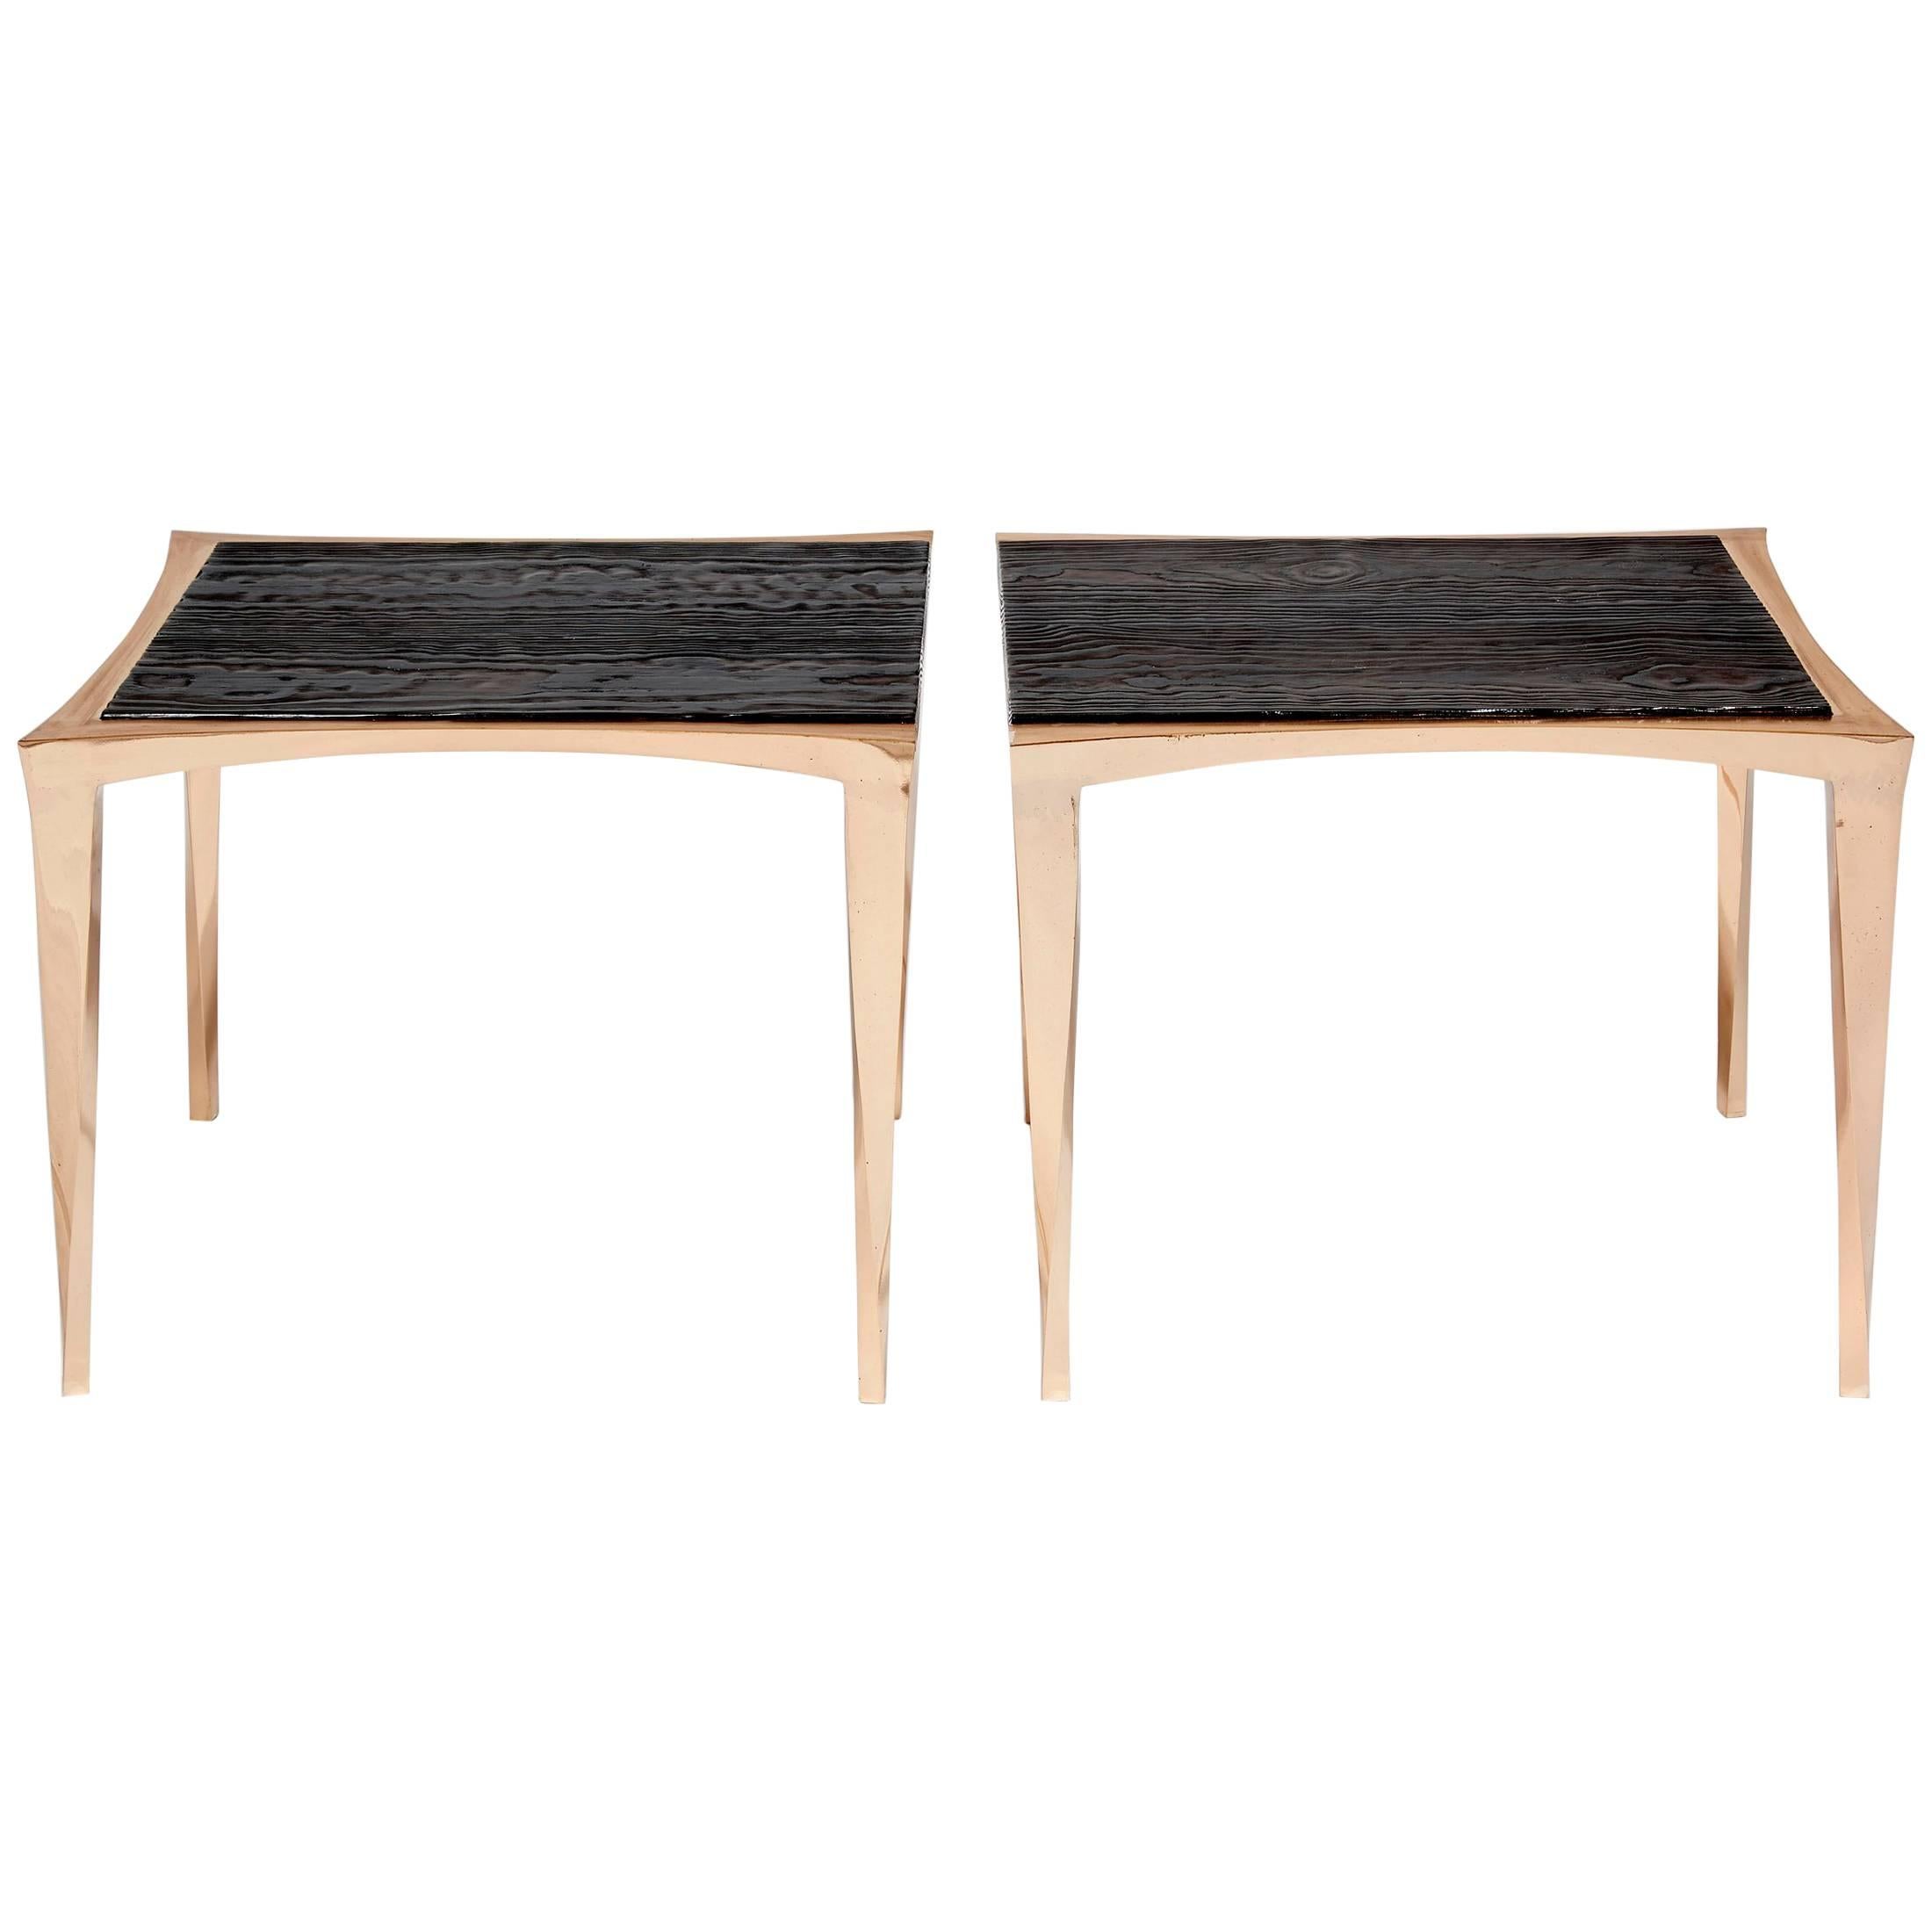 Pair of Bronze and Burnt Pinewood Side Tables by Anasthasia Millot & WH Studio For Sale